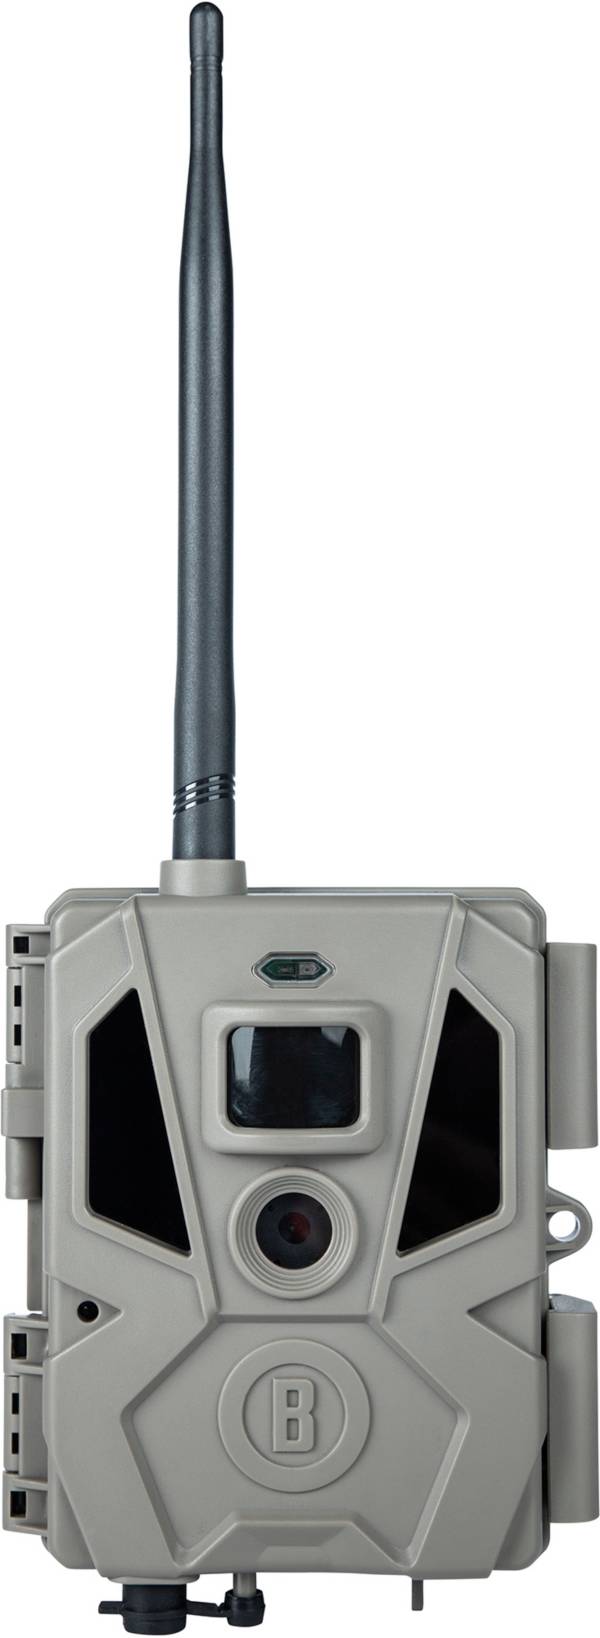 Bushnell Cellucore A20 Cellular Camera - 20MP product image